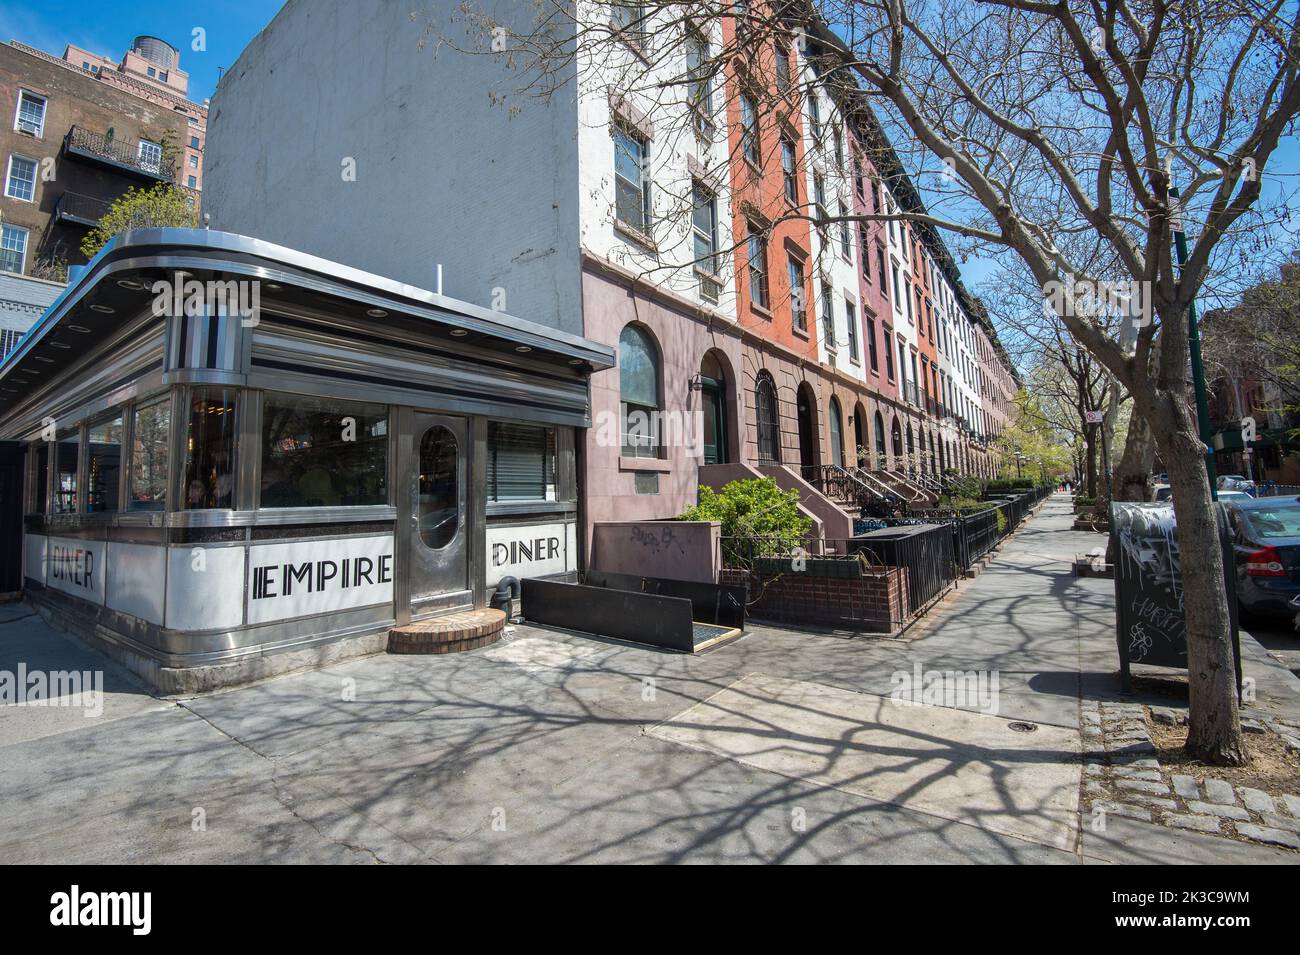 The Empire Diner is a famous diner at the corner of 10th Avenue and 22nd Street on Manhattan in New York City that has featured in many movies. Stock Photo